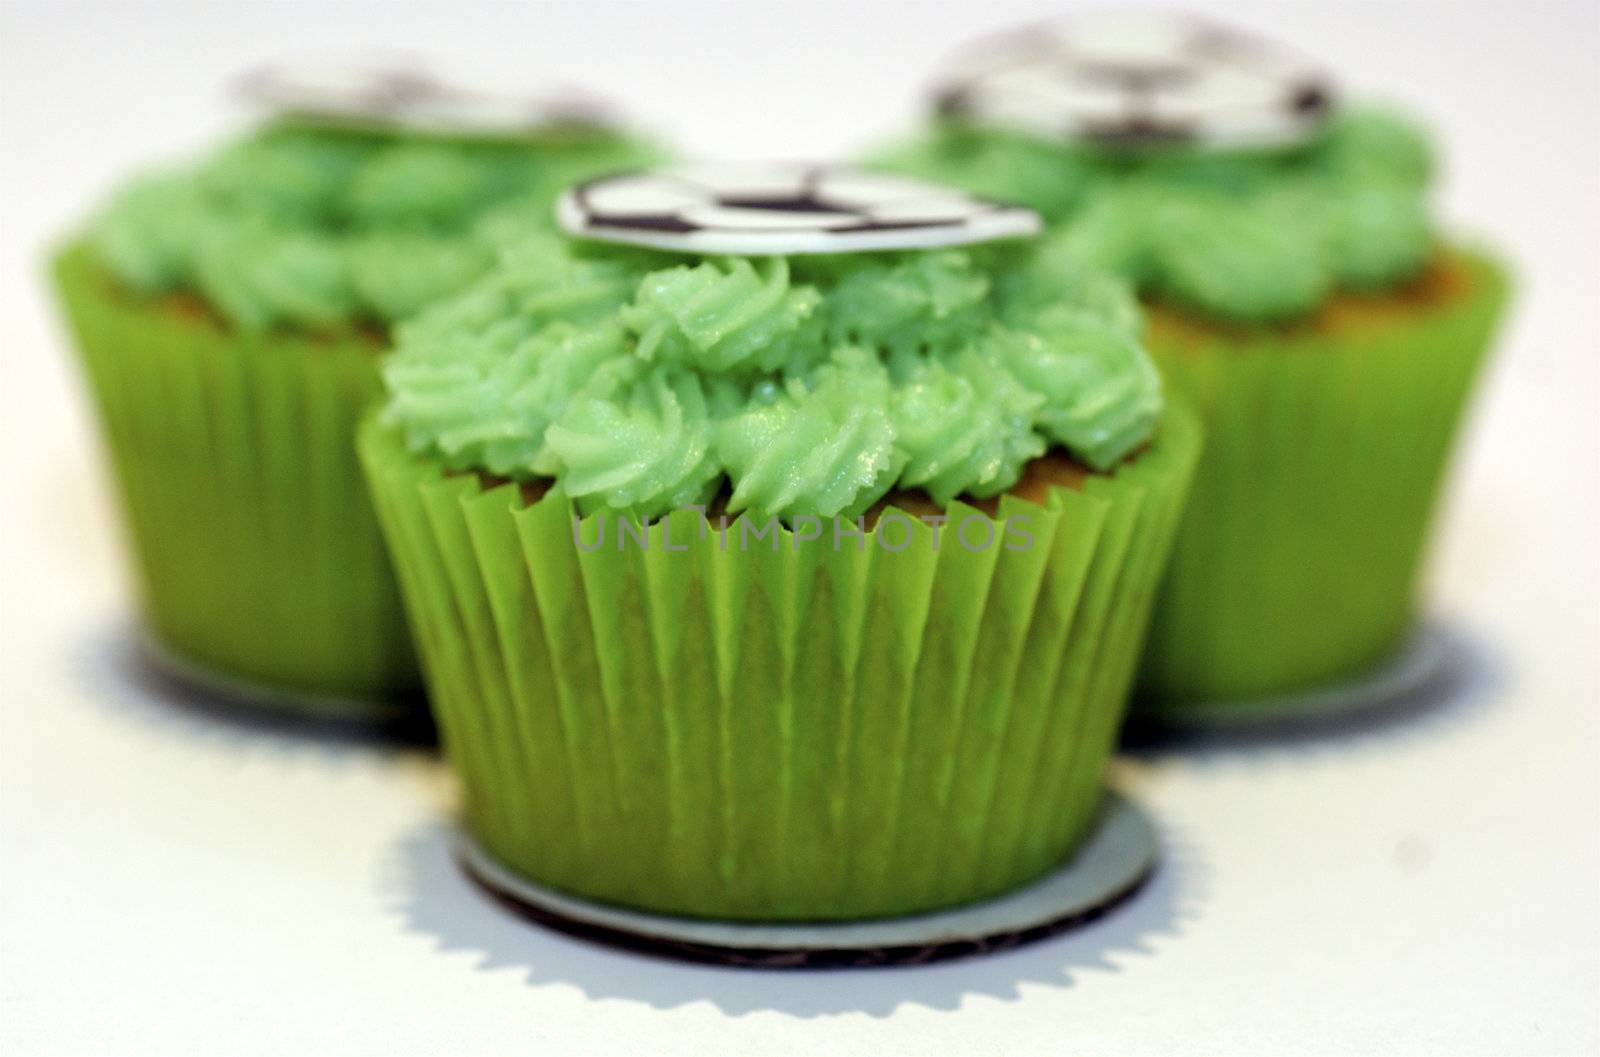 Three cupcakes with green frosting and a flat sugar 'football' on the stop, against a white background with copy space.